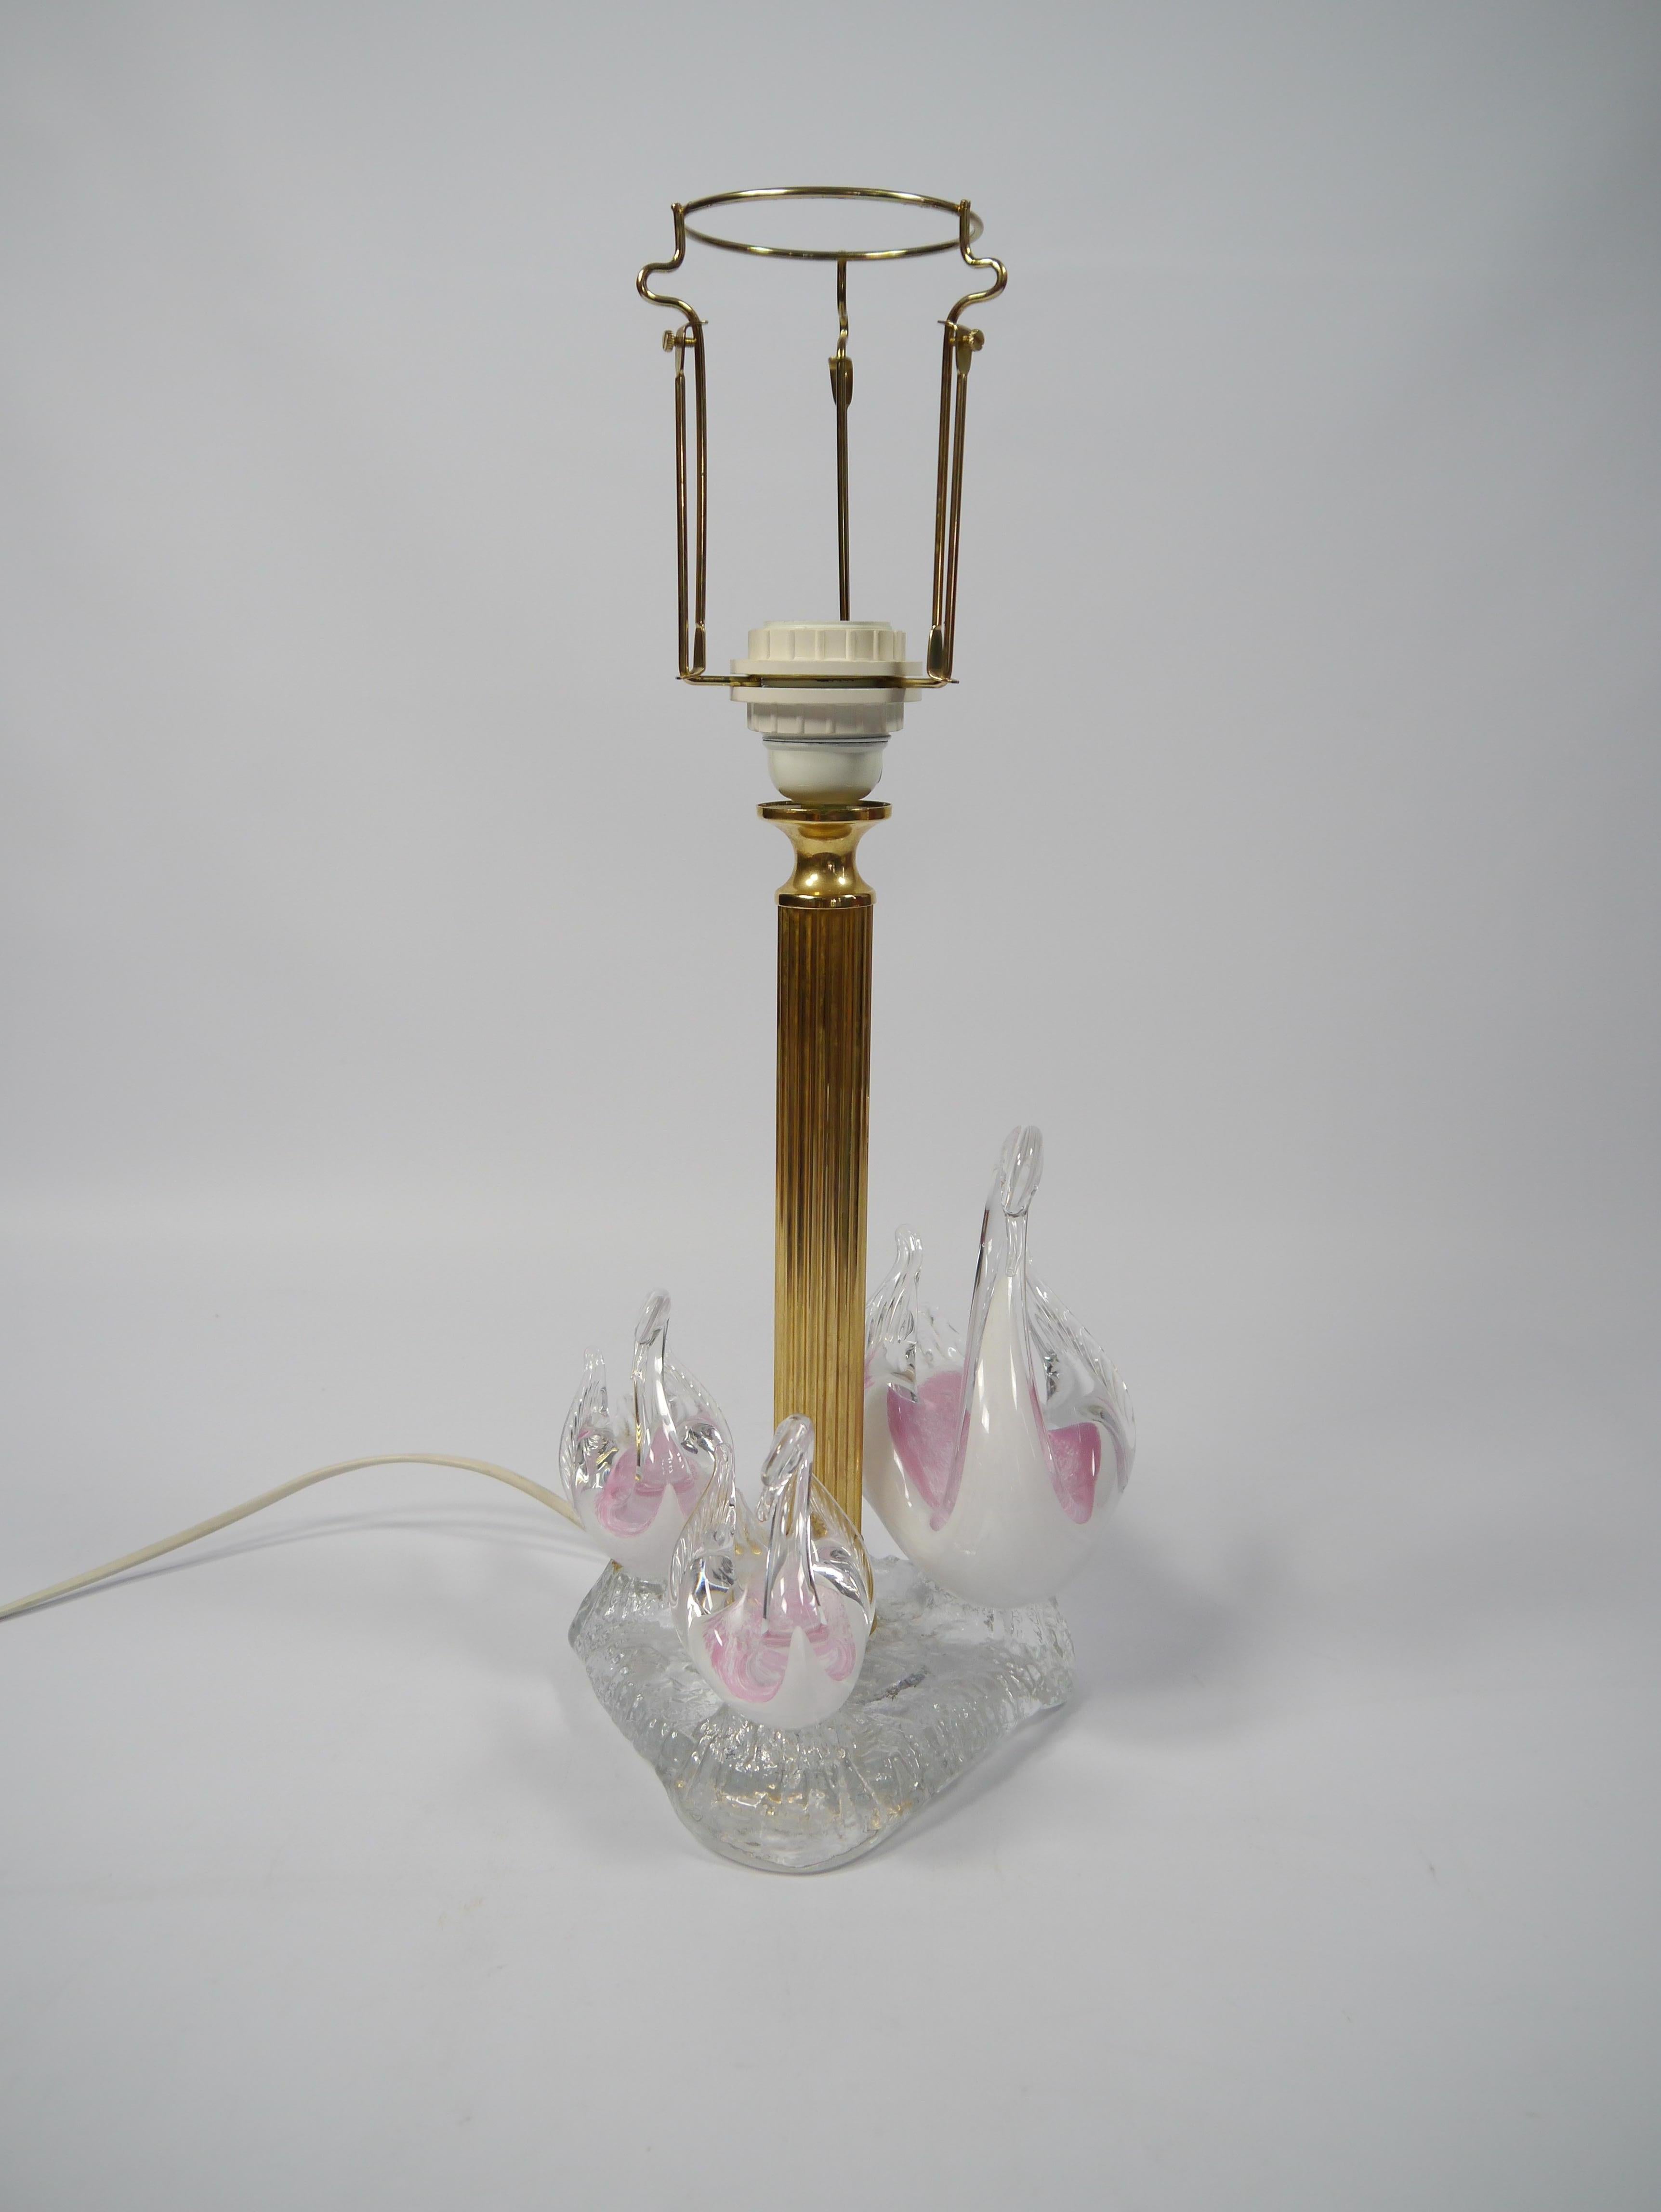 Kitsch brass and glass table lamp, featuring three art glass swans in pinkish hues.